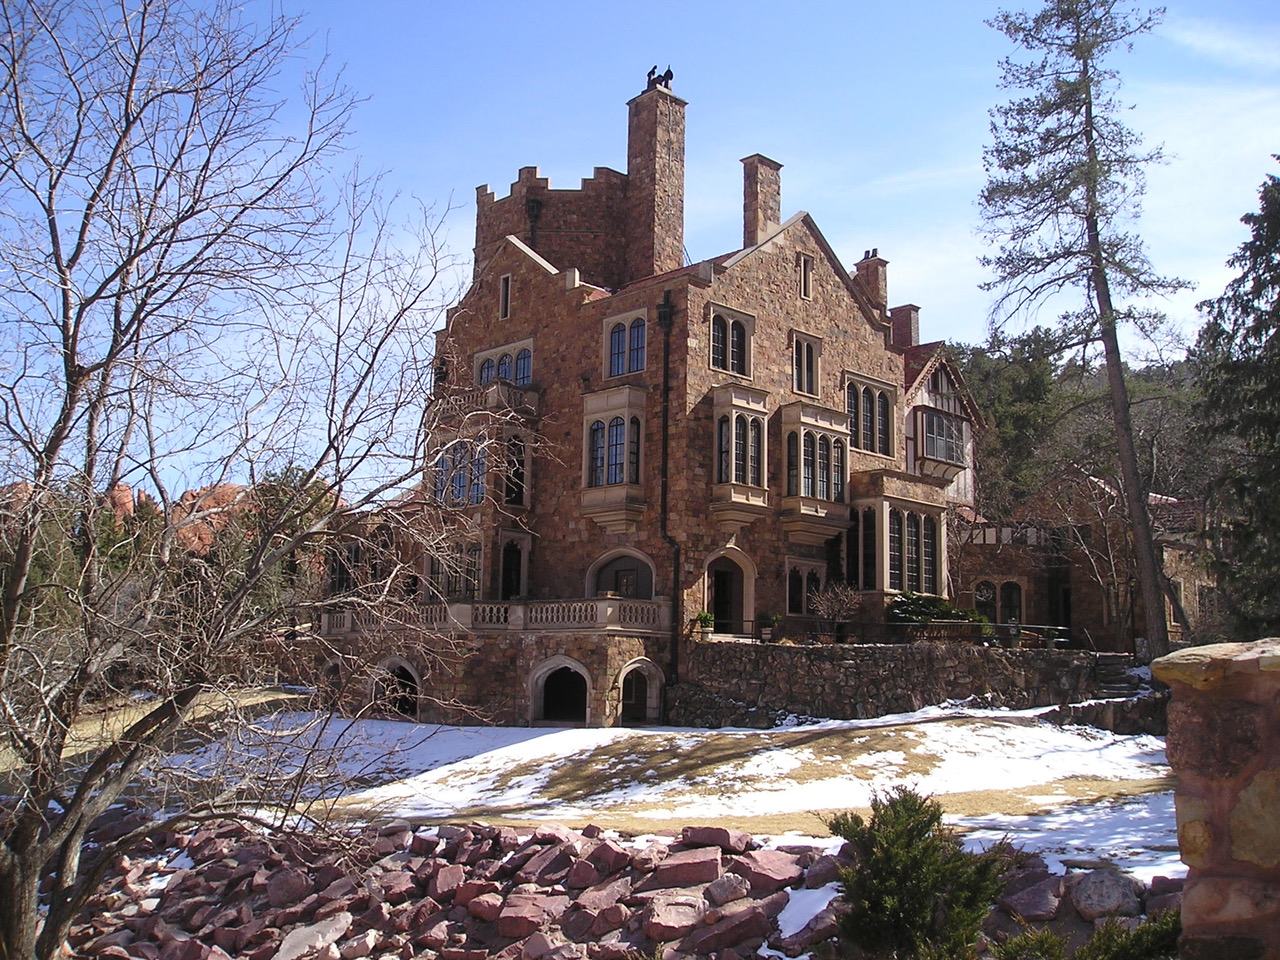 The Glen Eyrie house photographed in winter.